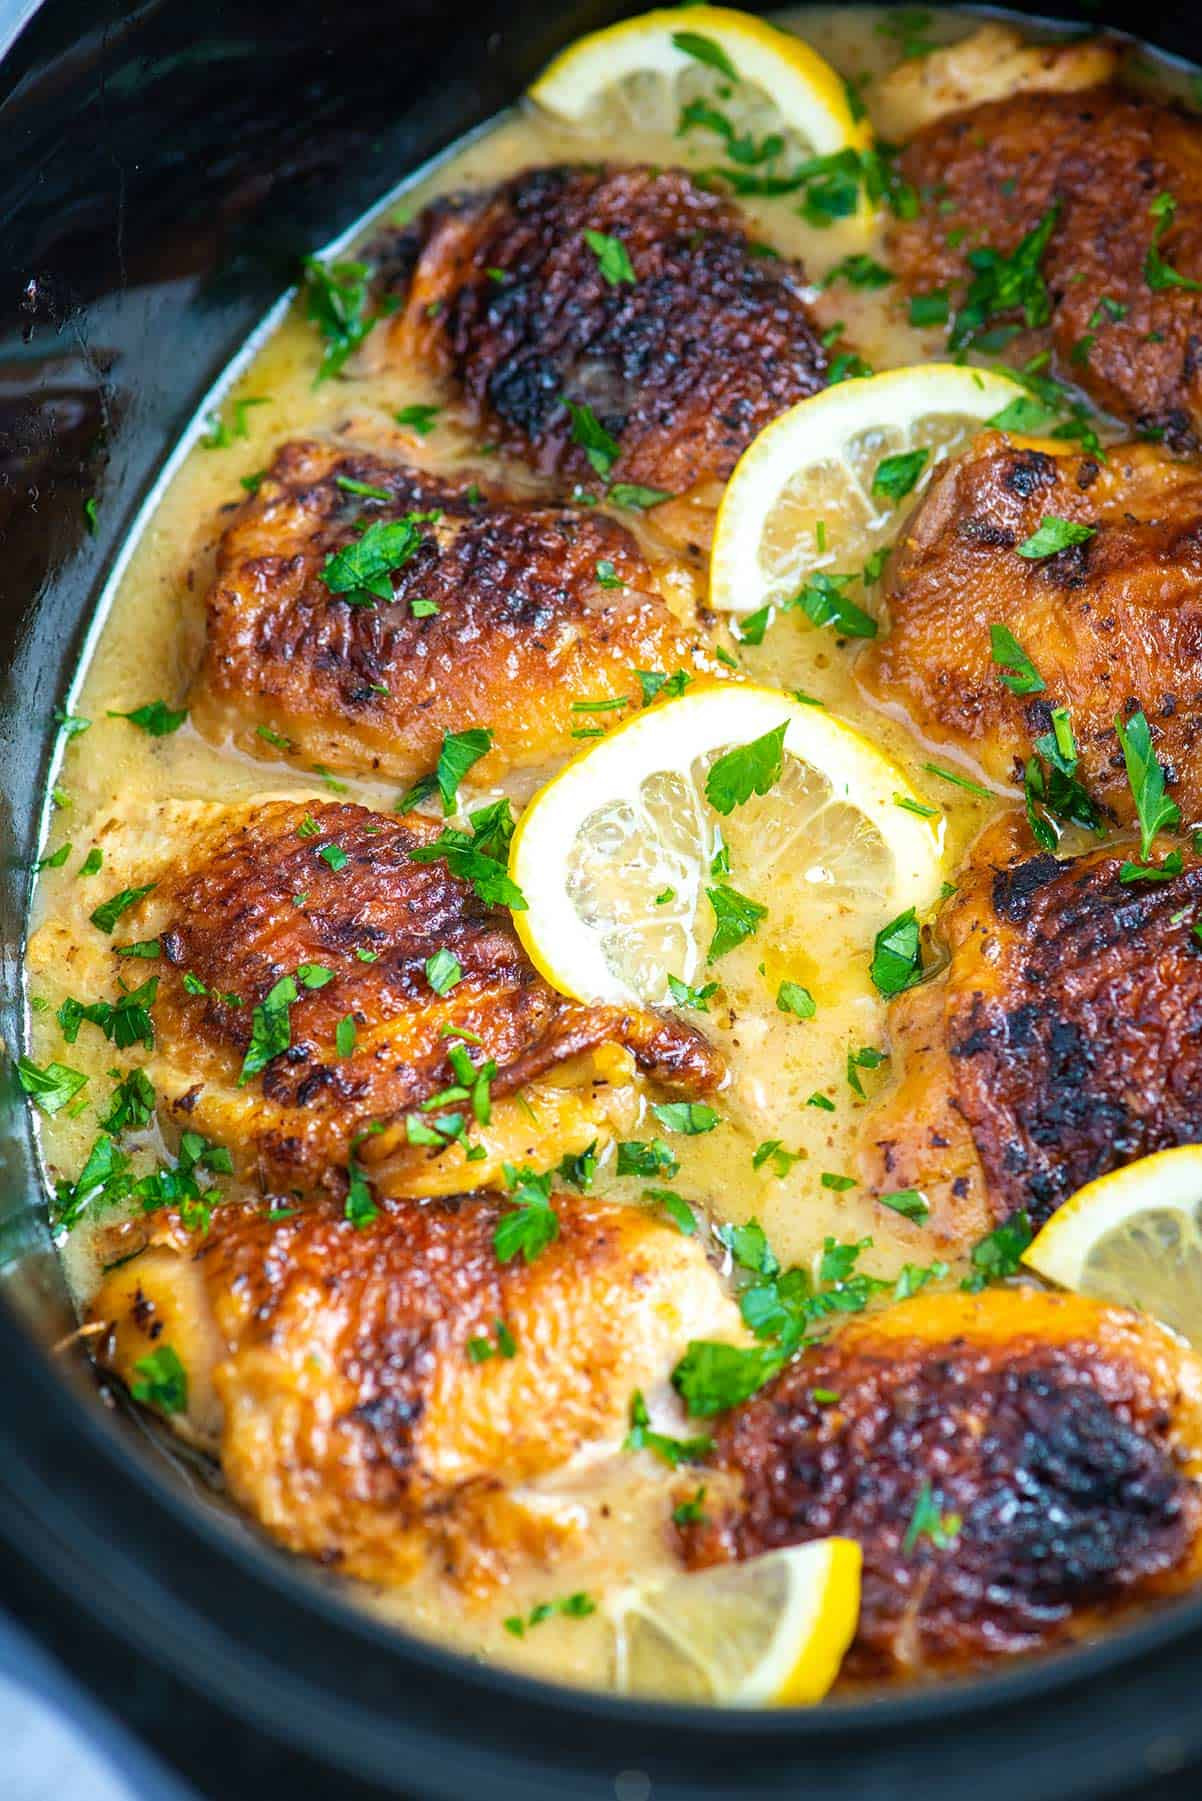 Bone In Chicken Thighs Slow Cooker
 Ultimate Slow Cooker Lemon Chicken Thighs